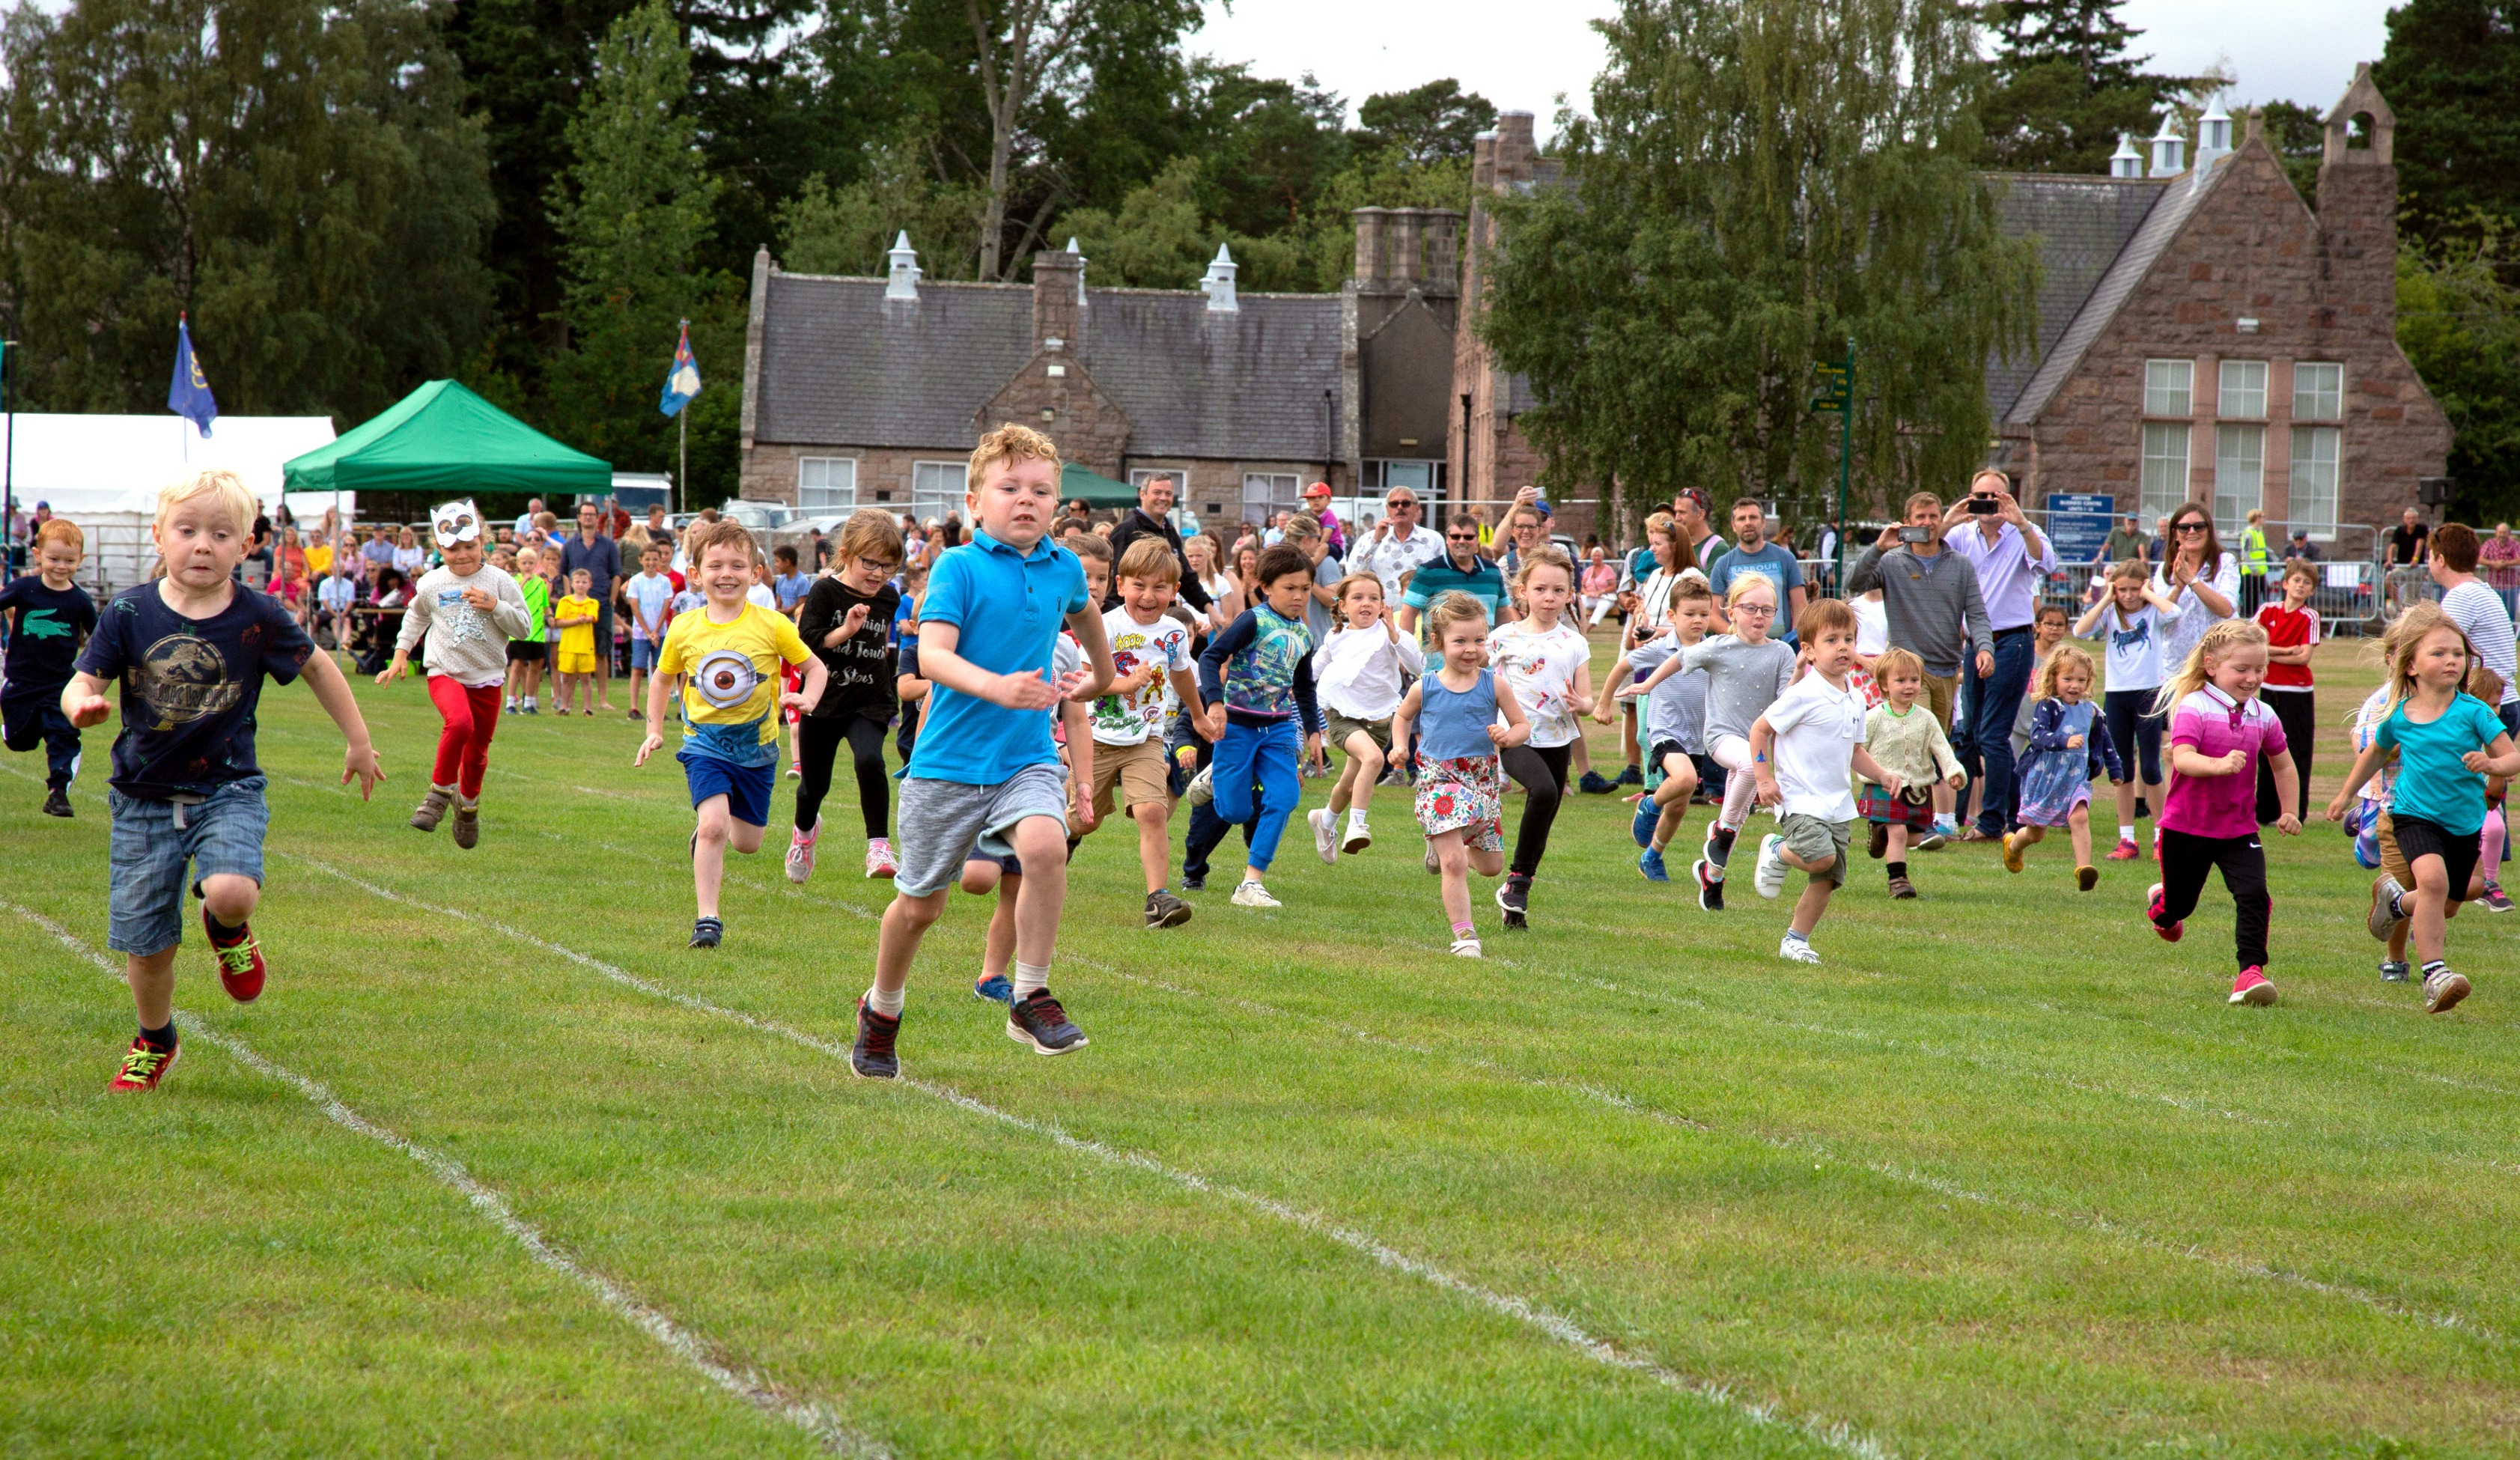 Youngsters taking part in the children's races at the 2018 Aboyne Highland Games